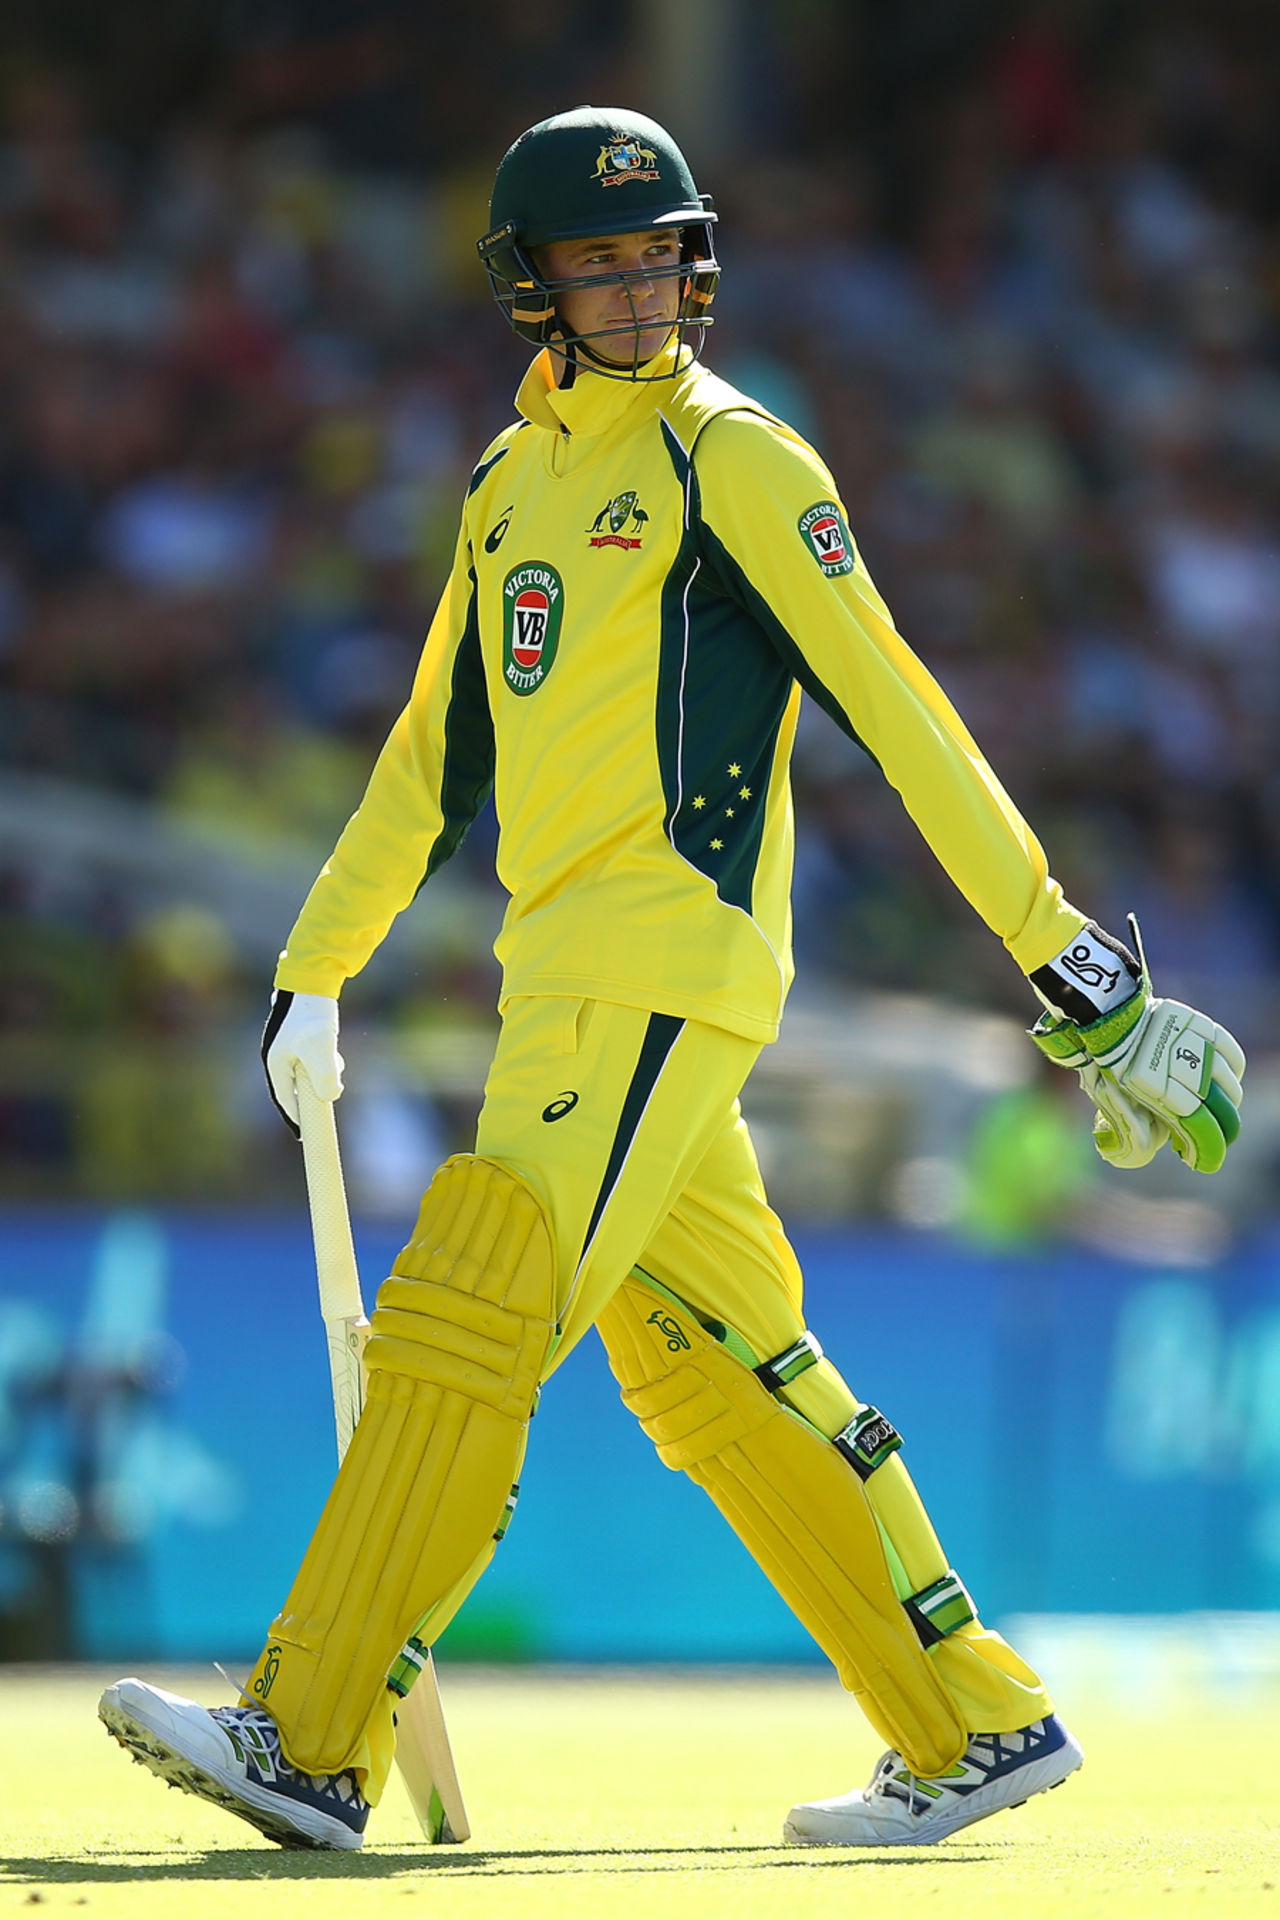 Peter Handscomb doesn't know it's a no-ball as he walks back after edging one to slip, Australia v Pakistan, 3rd ODI, Perth, January 19, 2017